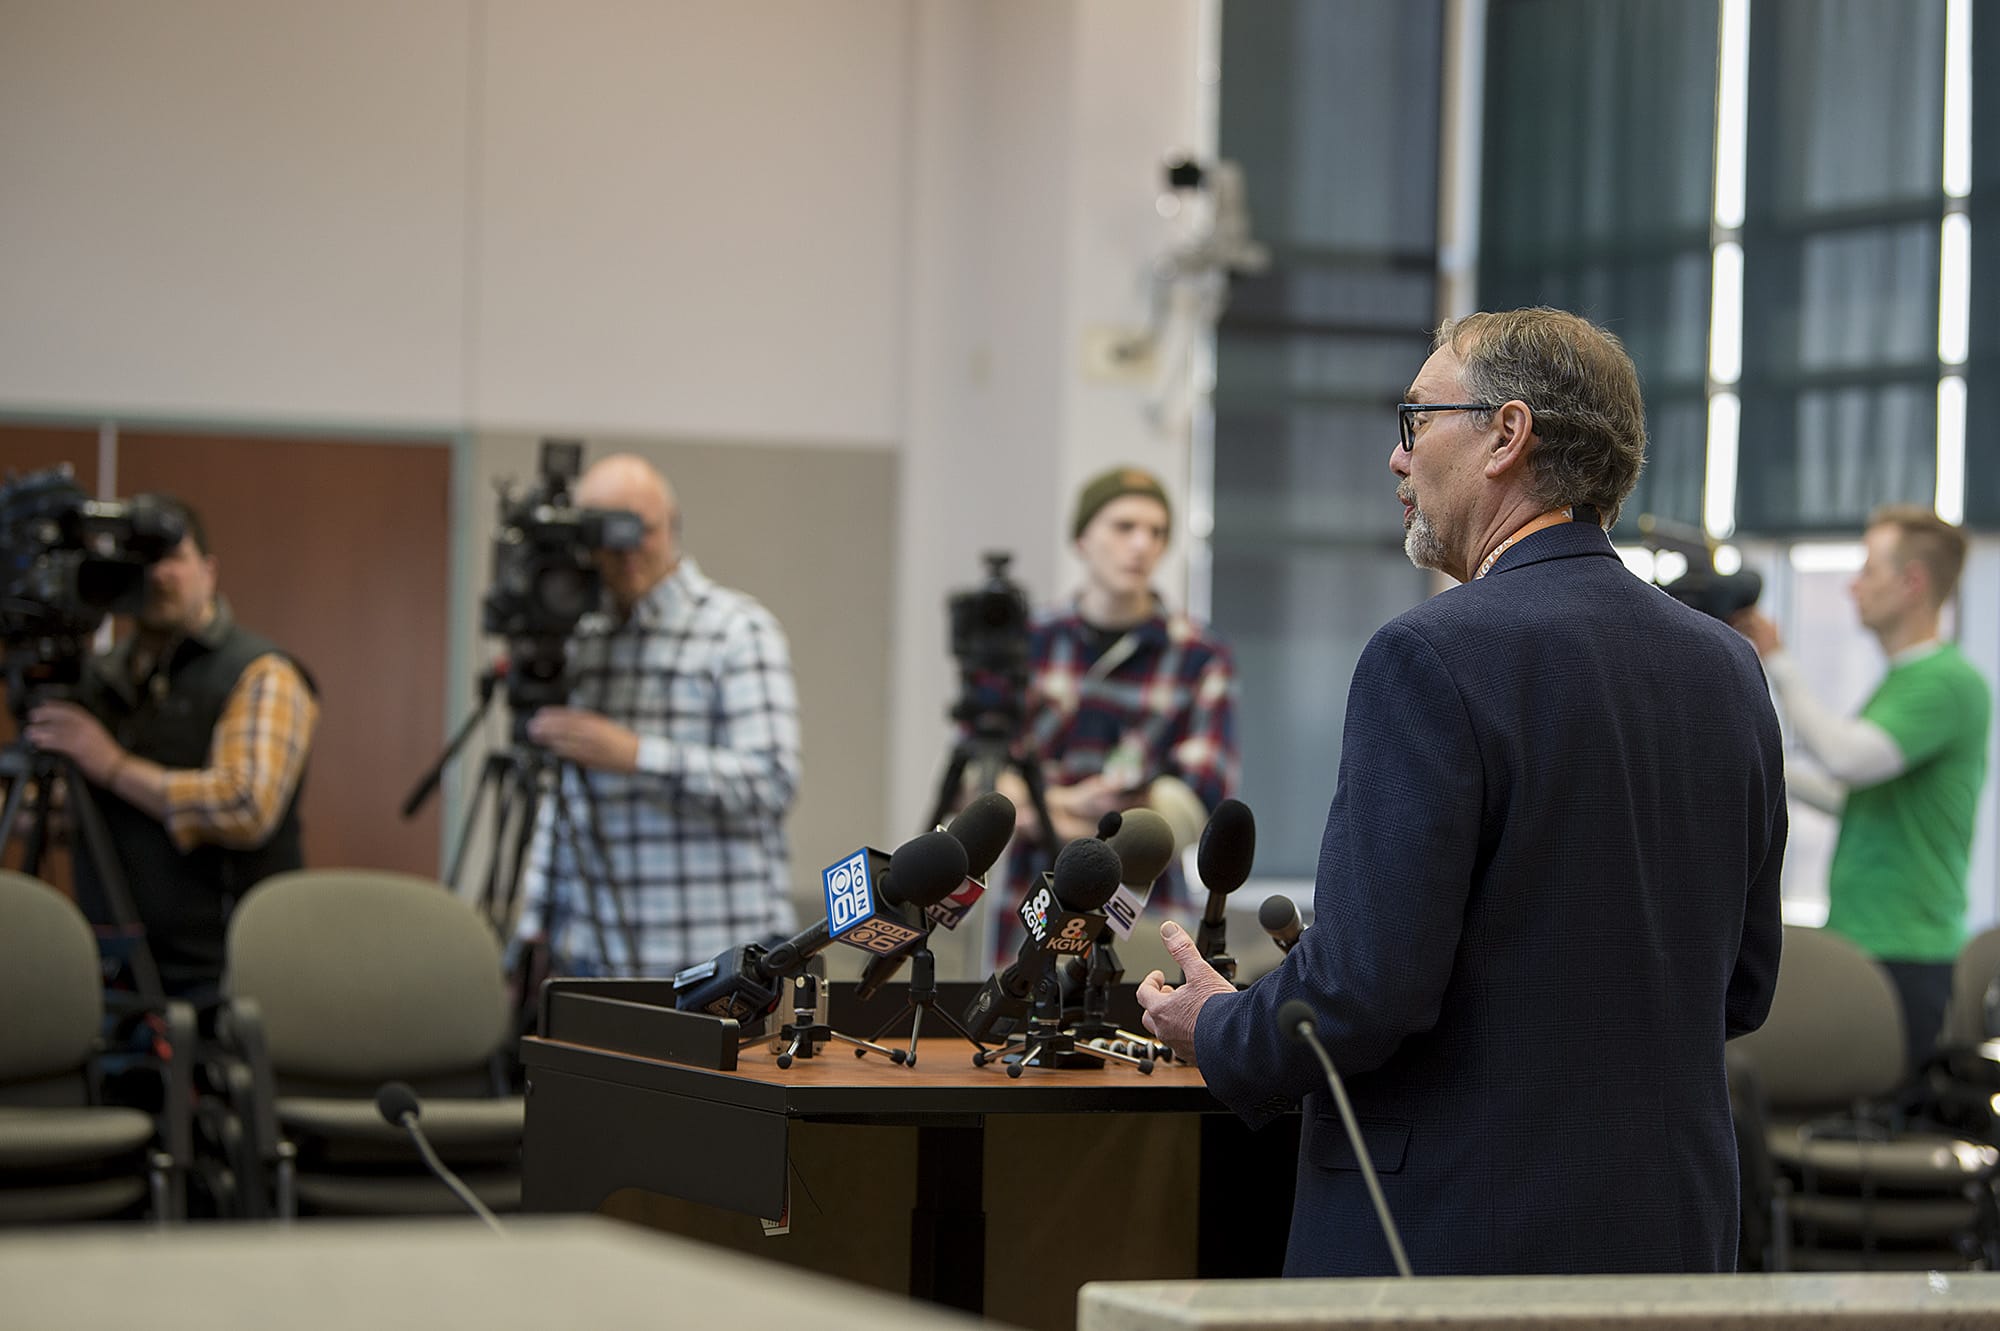 Dr. Alan Melnick, Clark County Health Officer and Public Health Director, speaks to the media about the two recent COVID-19 deaths during a press conference at the Clark County Public Hearing Room on Tuesday morning, March 17, 2020.